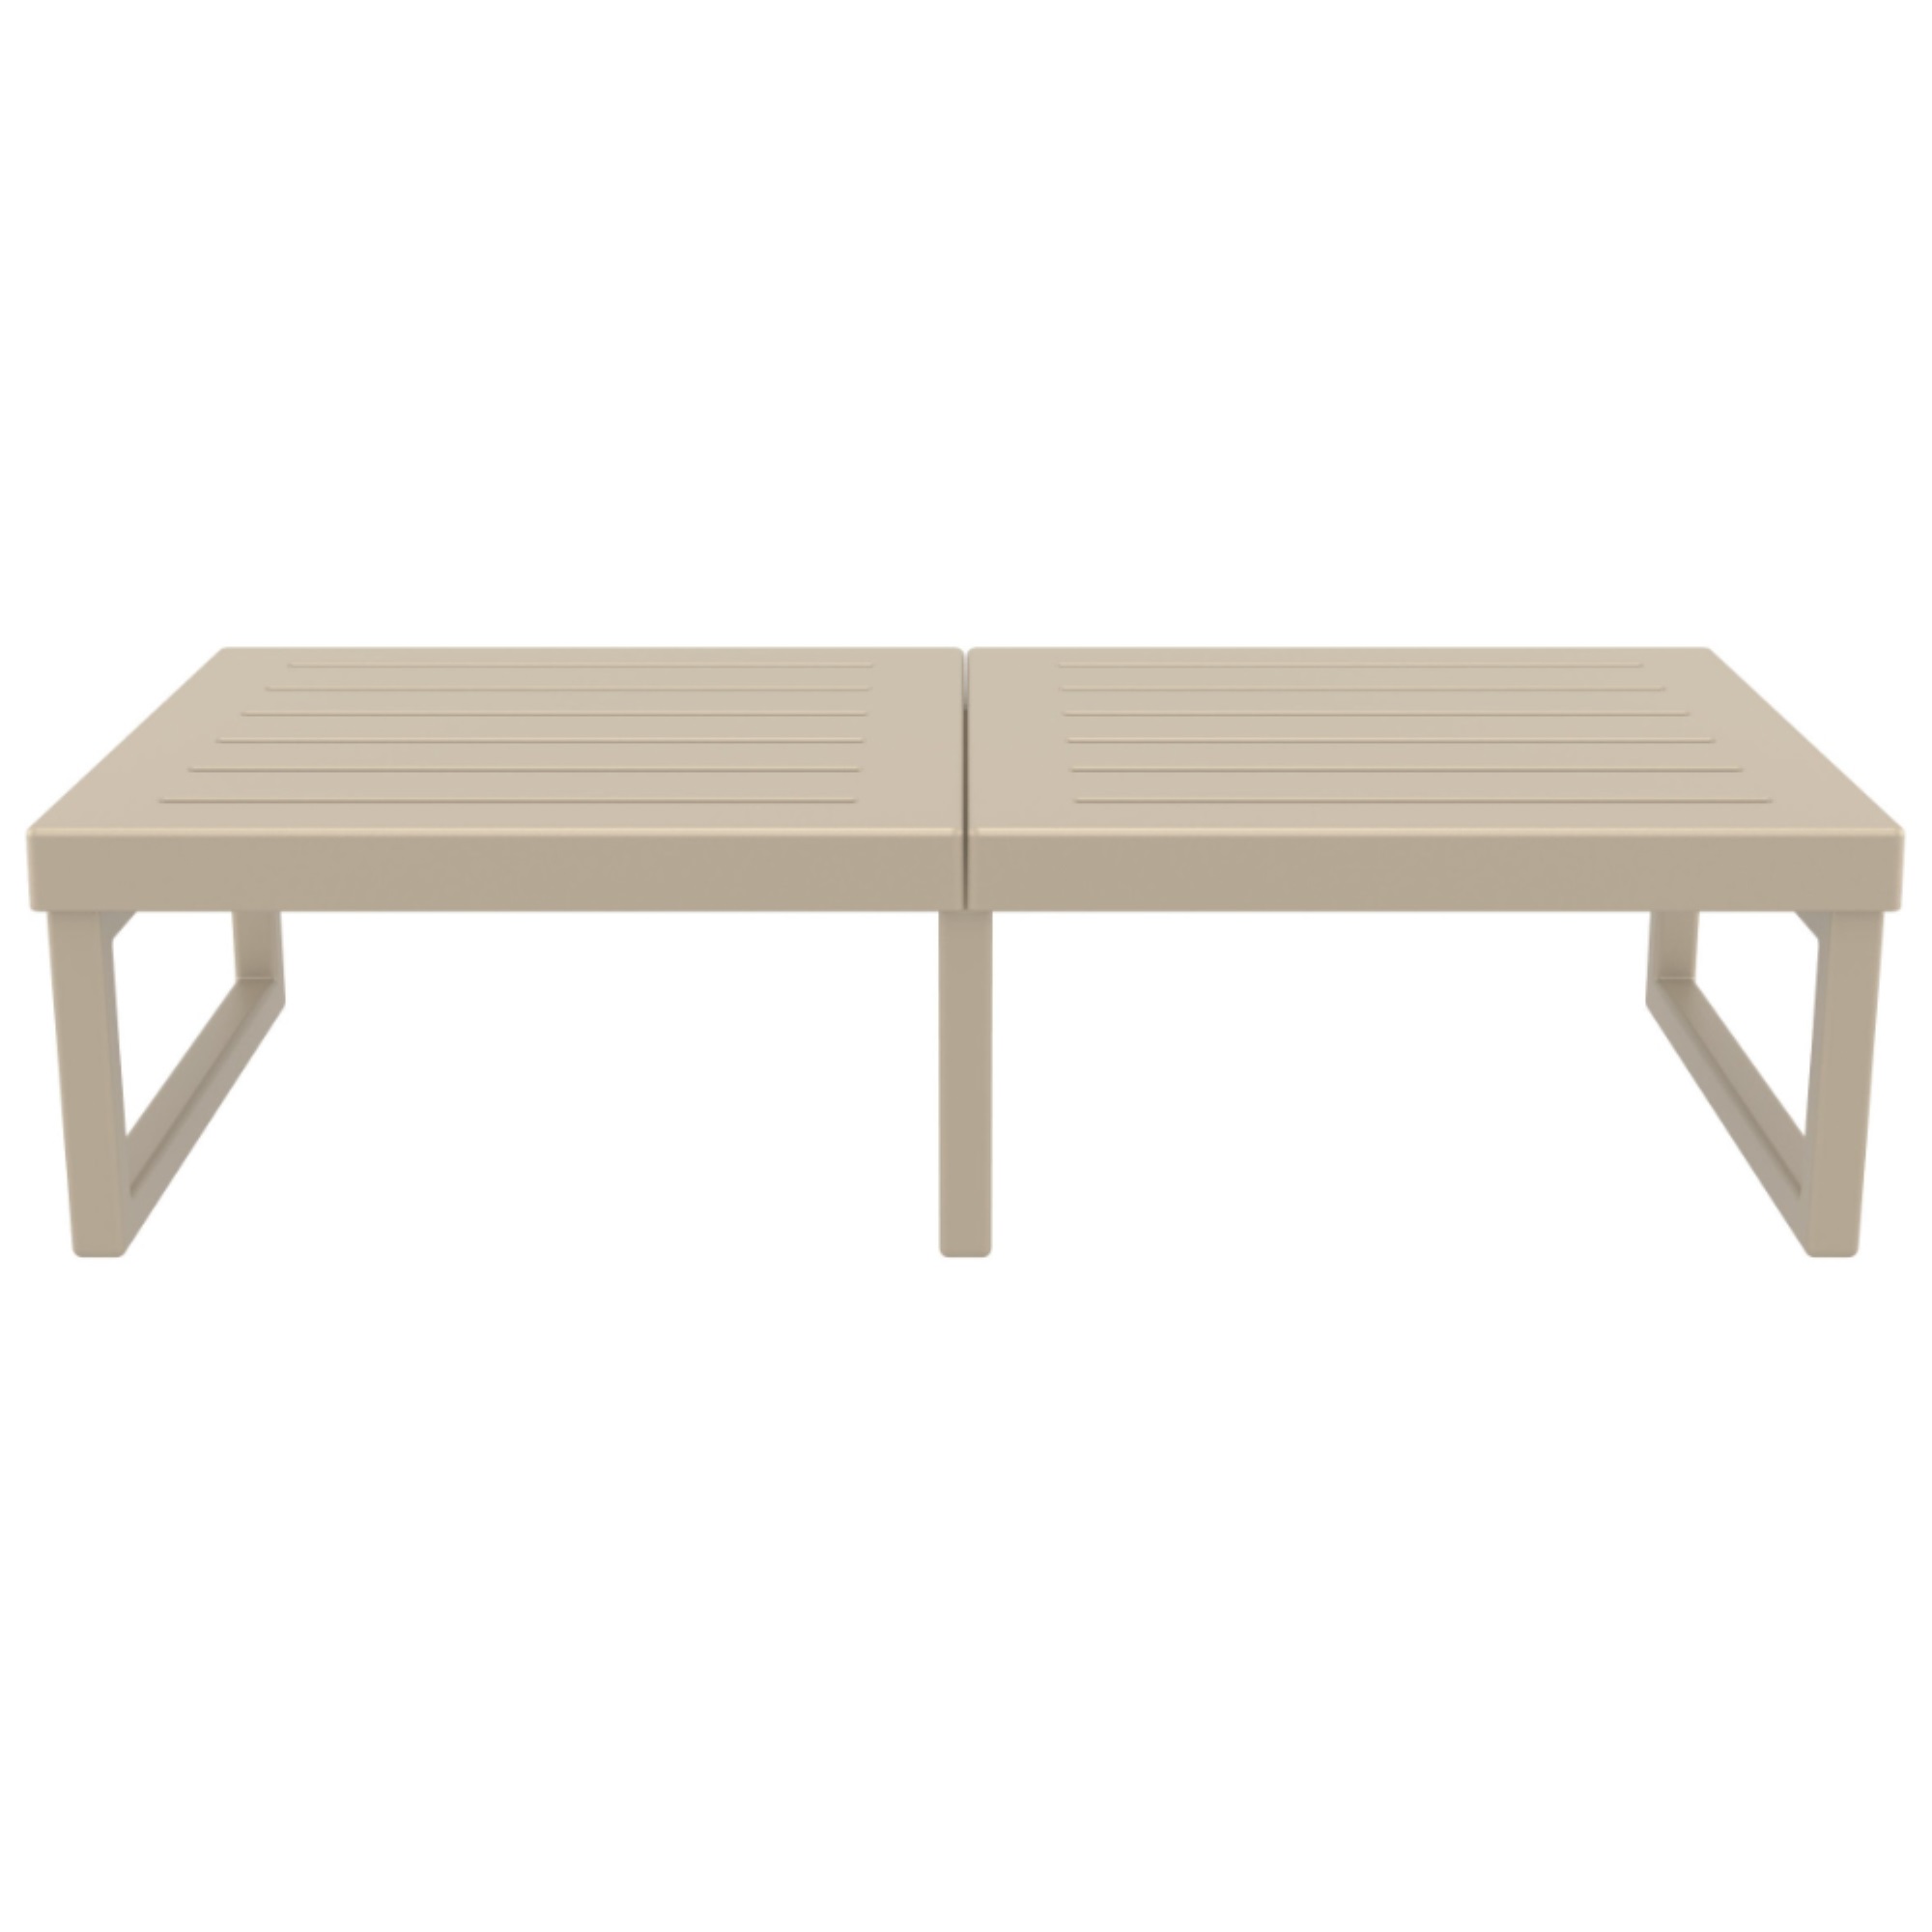 Compamia Mykonos Rectangle Lounge Coffee Table in Taupe Finish - image 2 of 2